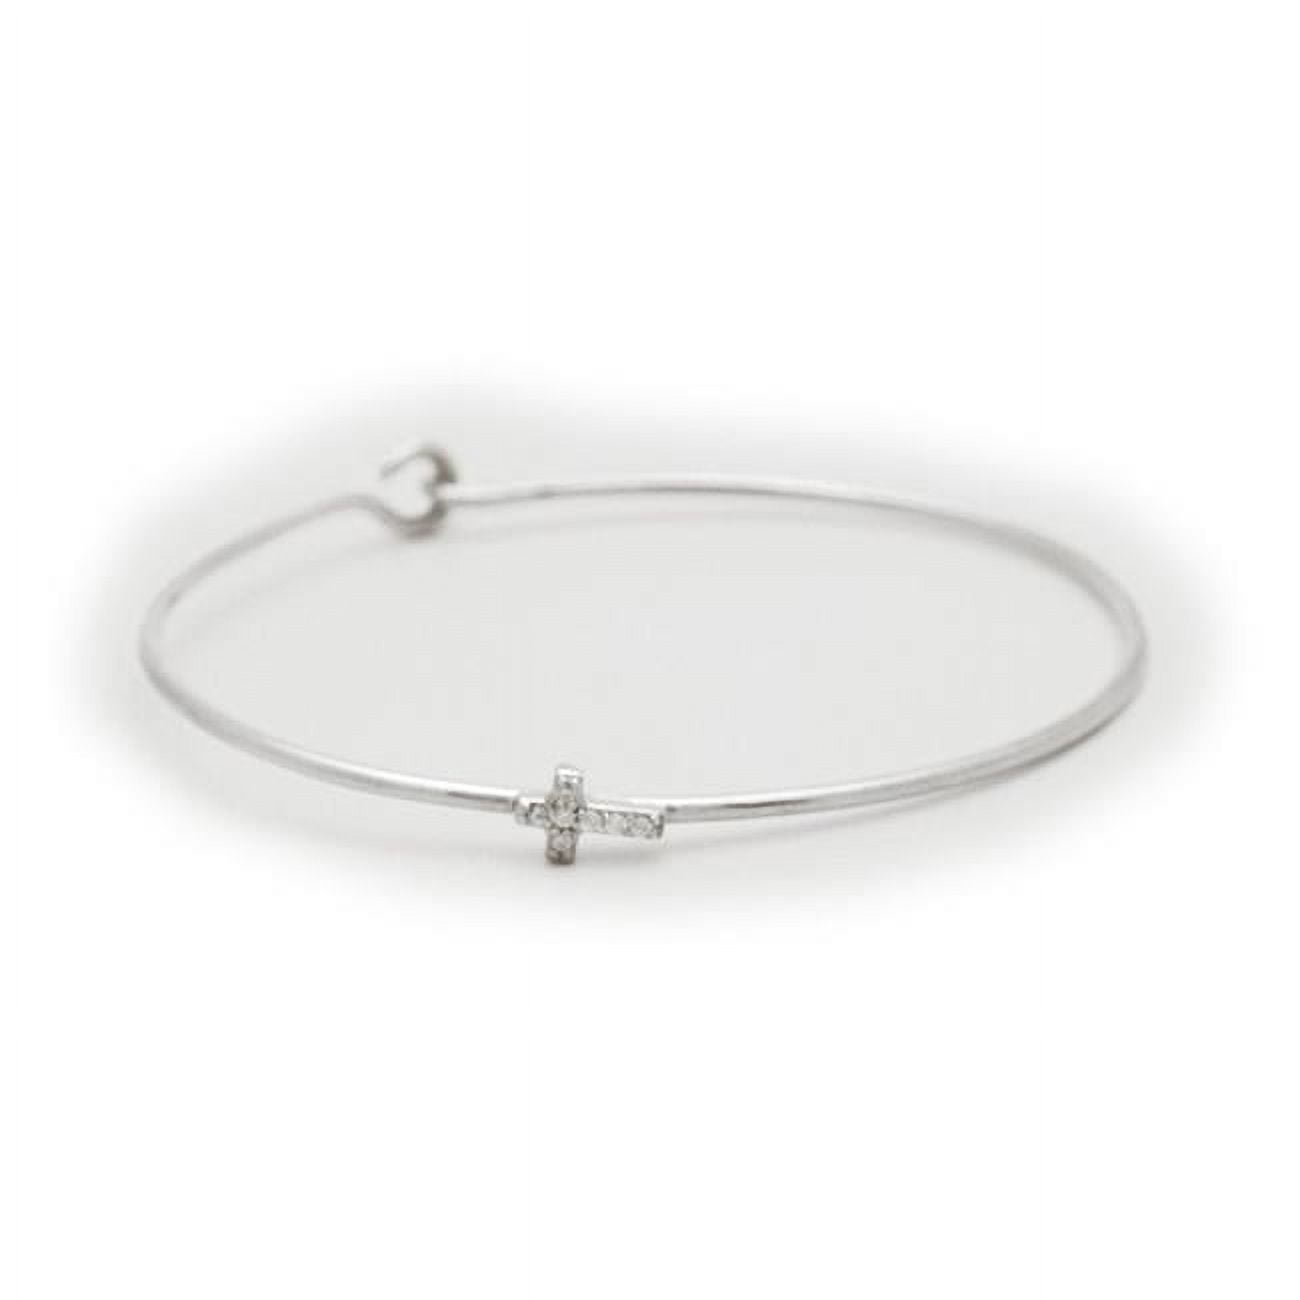 992110 Sterling Silver Bangle Wire Bracelet Accented With A Cz Cross